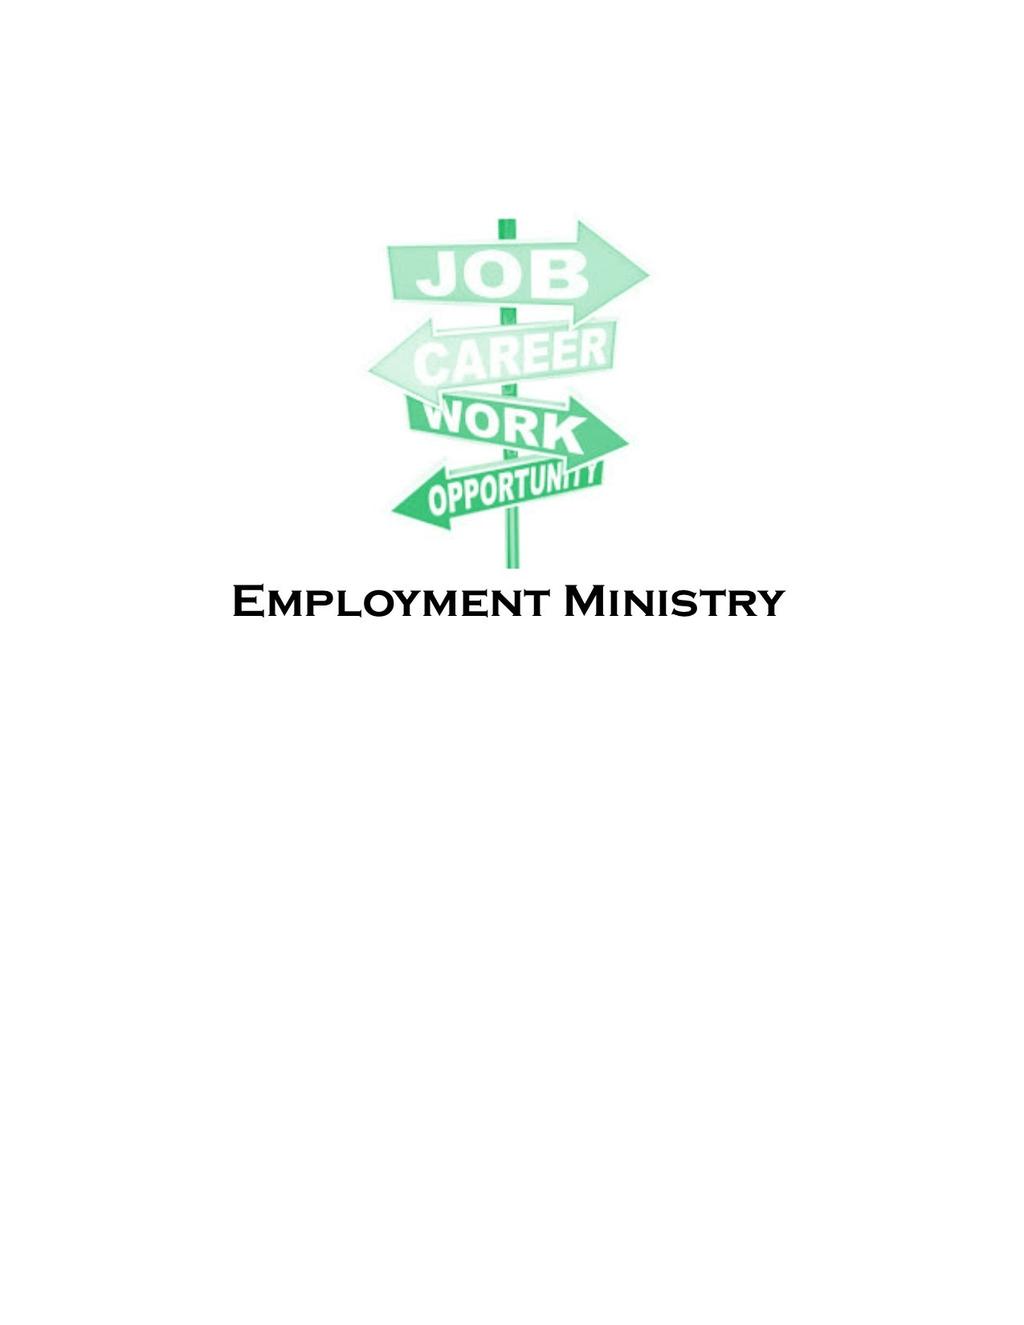 The Employment Ministry is in its infancy. The need for assisting people who are unemployed or underemployed to find and maintain gainful employment continues to exist.